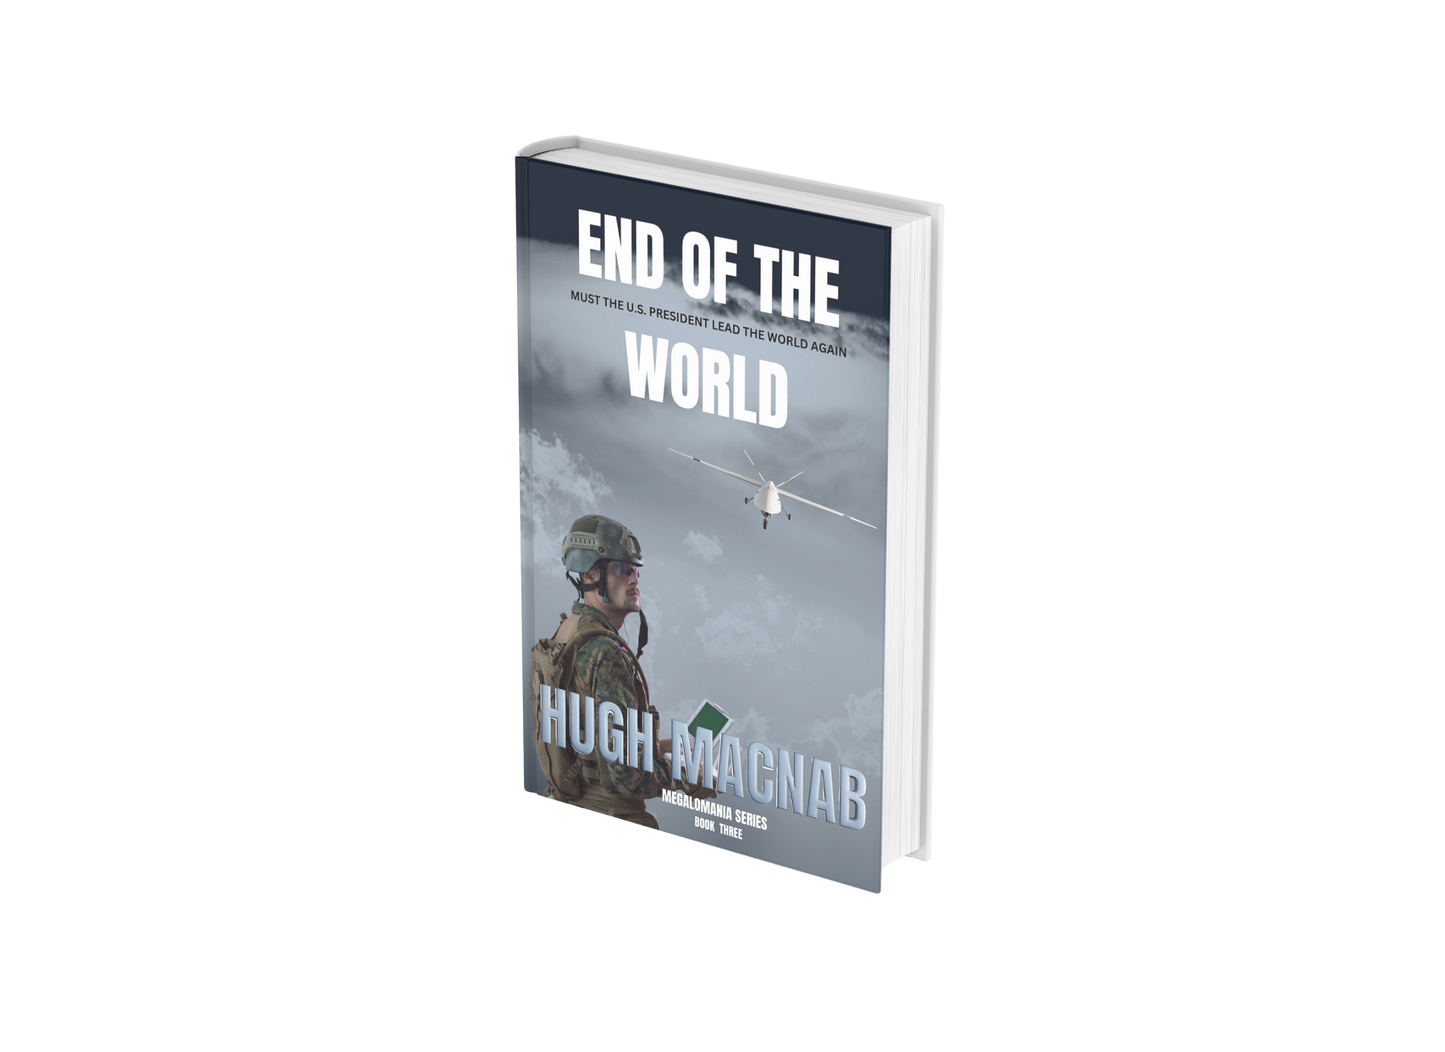 End of the World (Ebook)